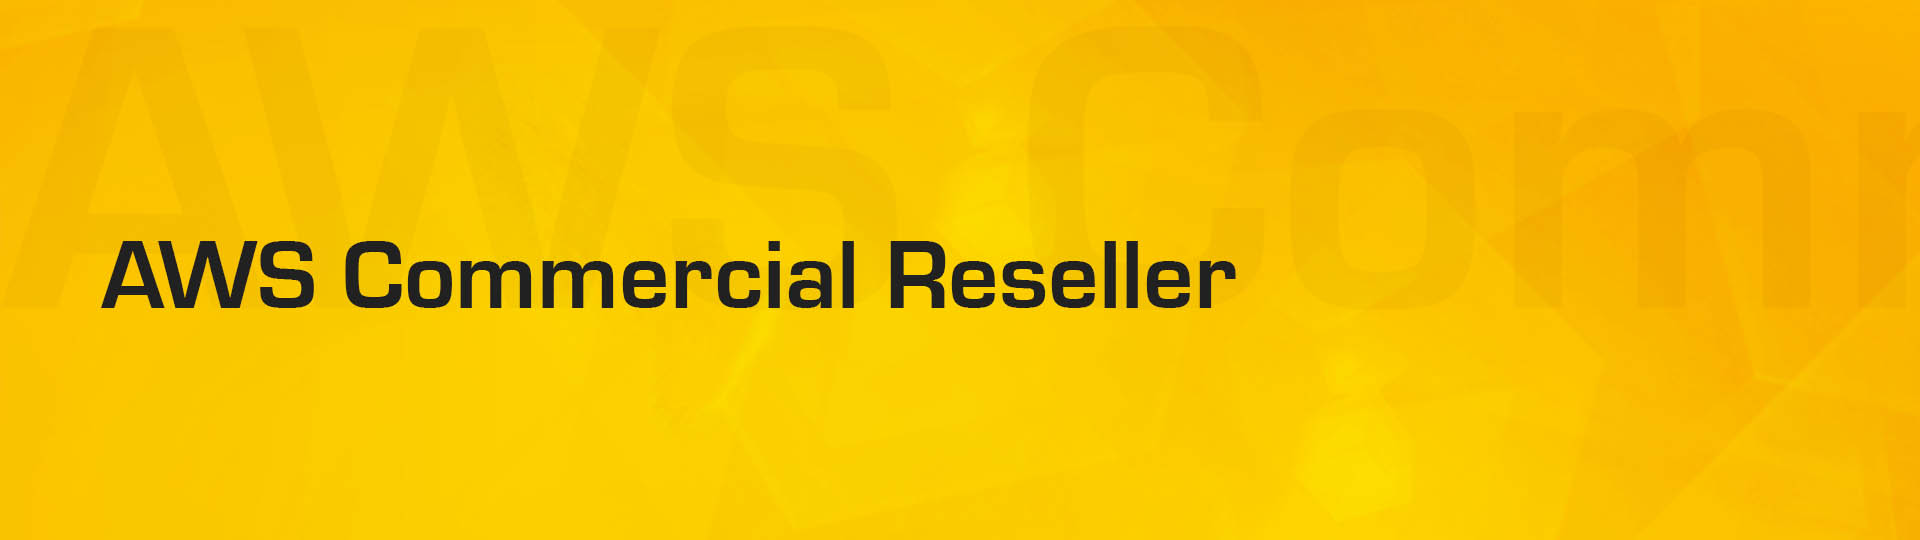 AWS Commercial reseller